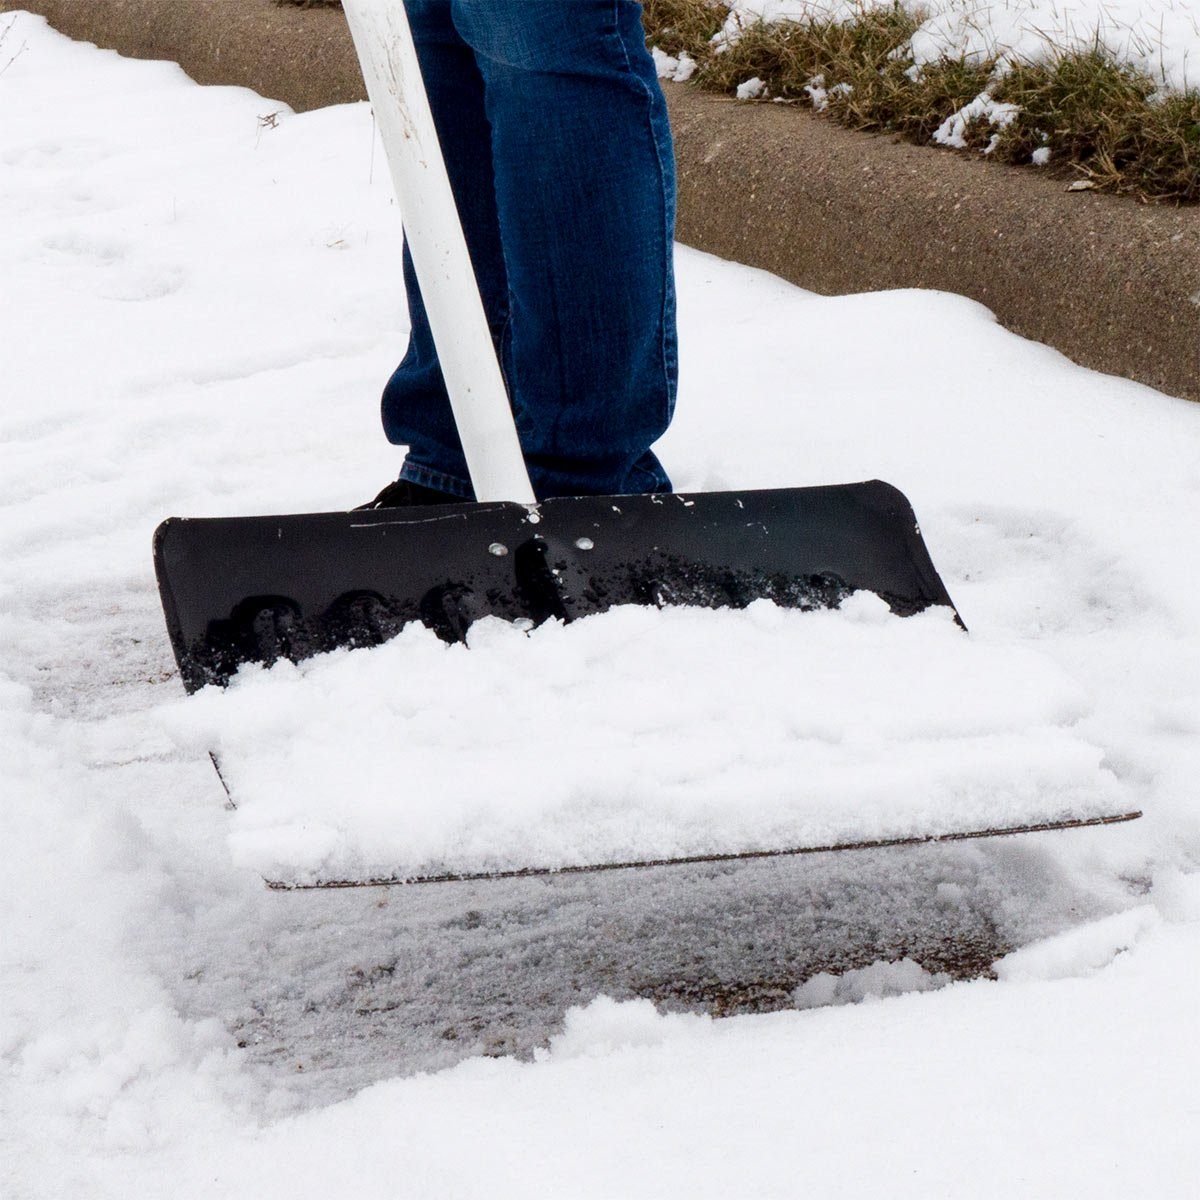 scooping snow with car wax coated snow shovel